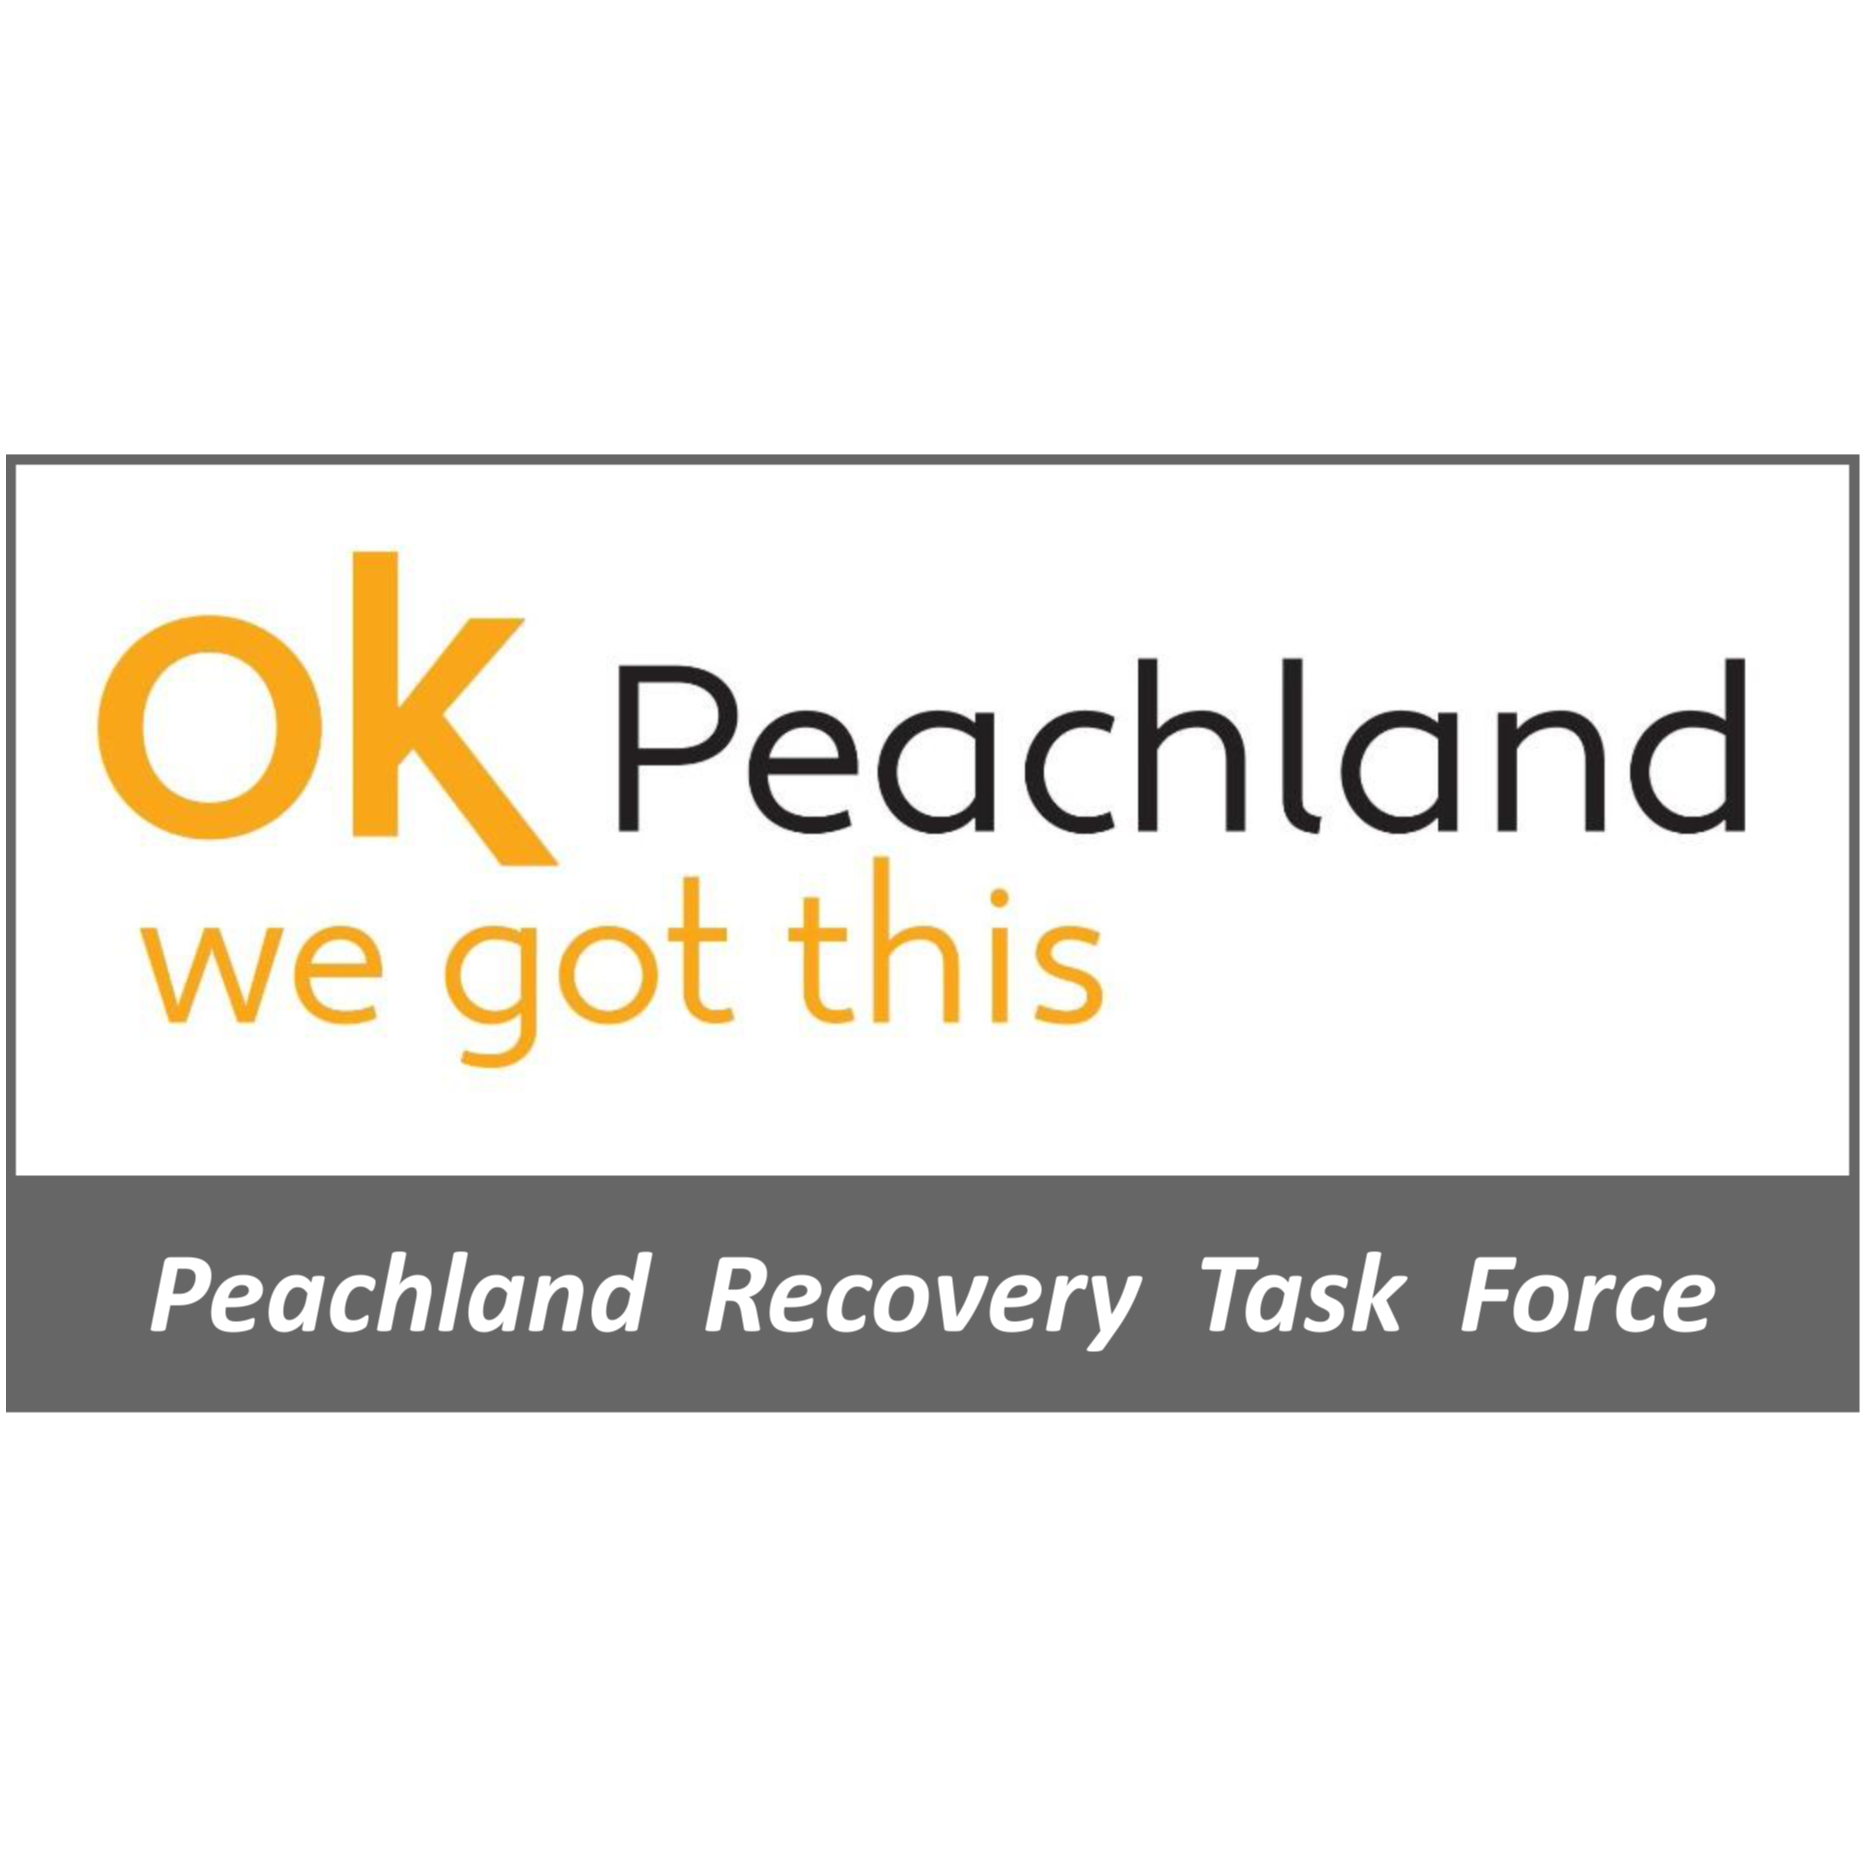 Peachland Recovery Task Force's Logo